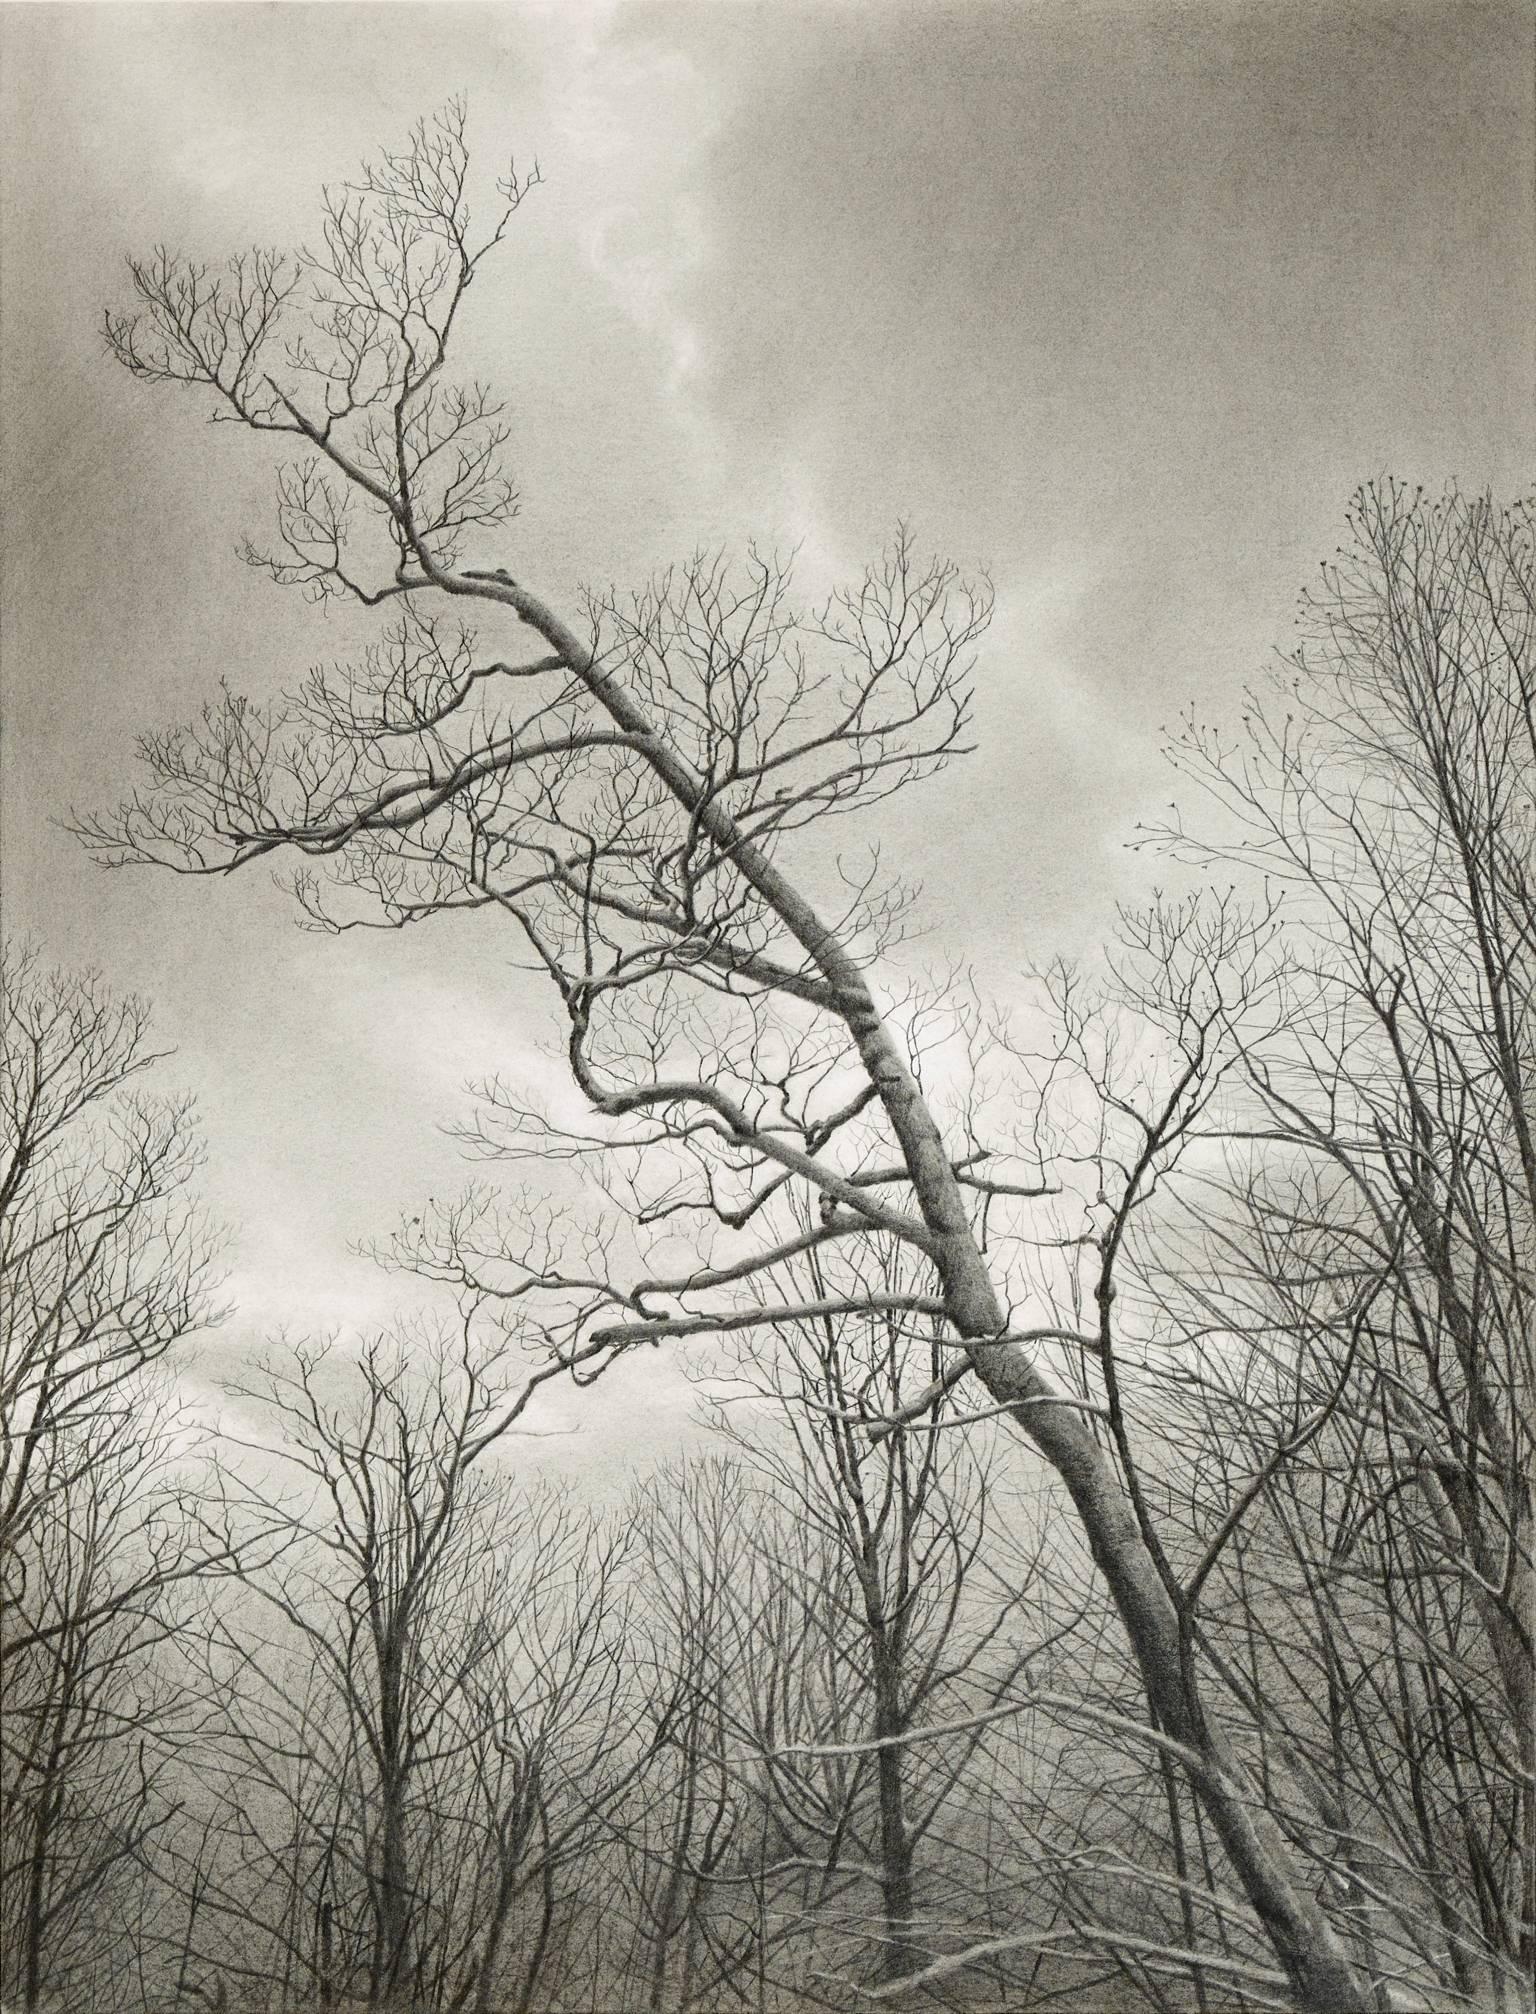 Mary Reilly
Wintry Trees, 2017
Graphite on paper
23.50h x 18w 

Reilly explores the full range of her medium, finding subtle gradations to capture the wane reach of the tree branches against the heft of the snowy clouds. This hyperrealist work is